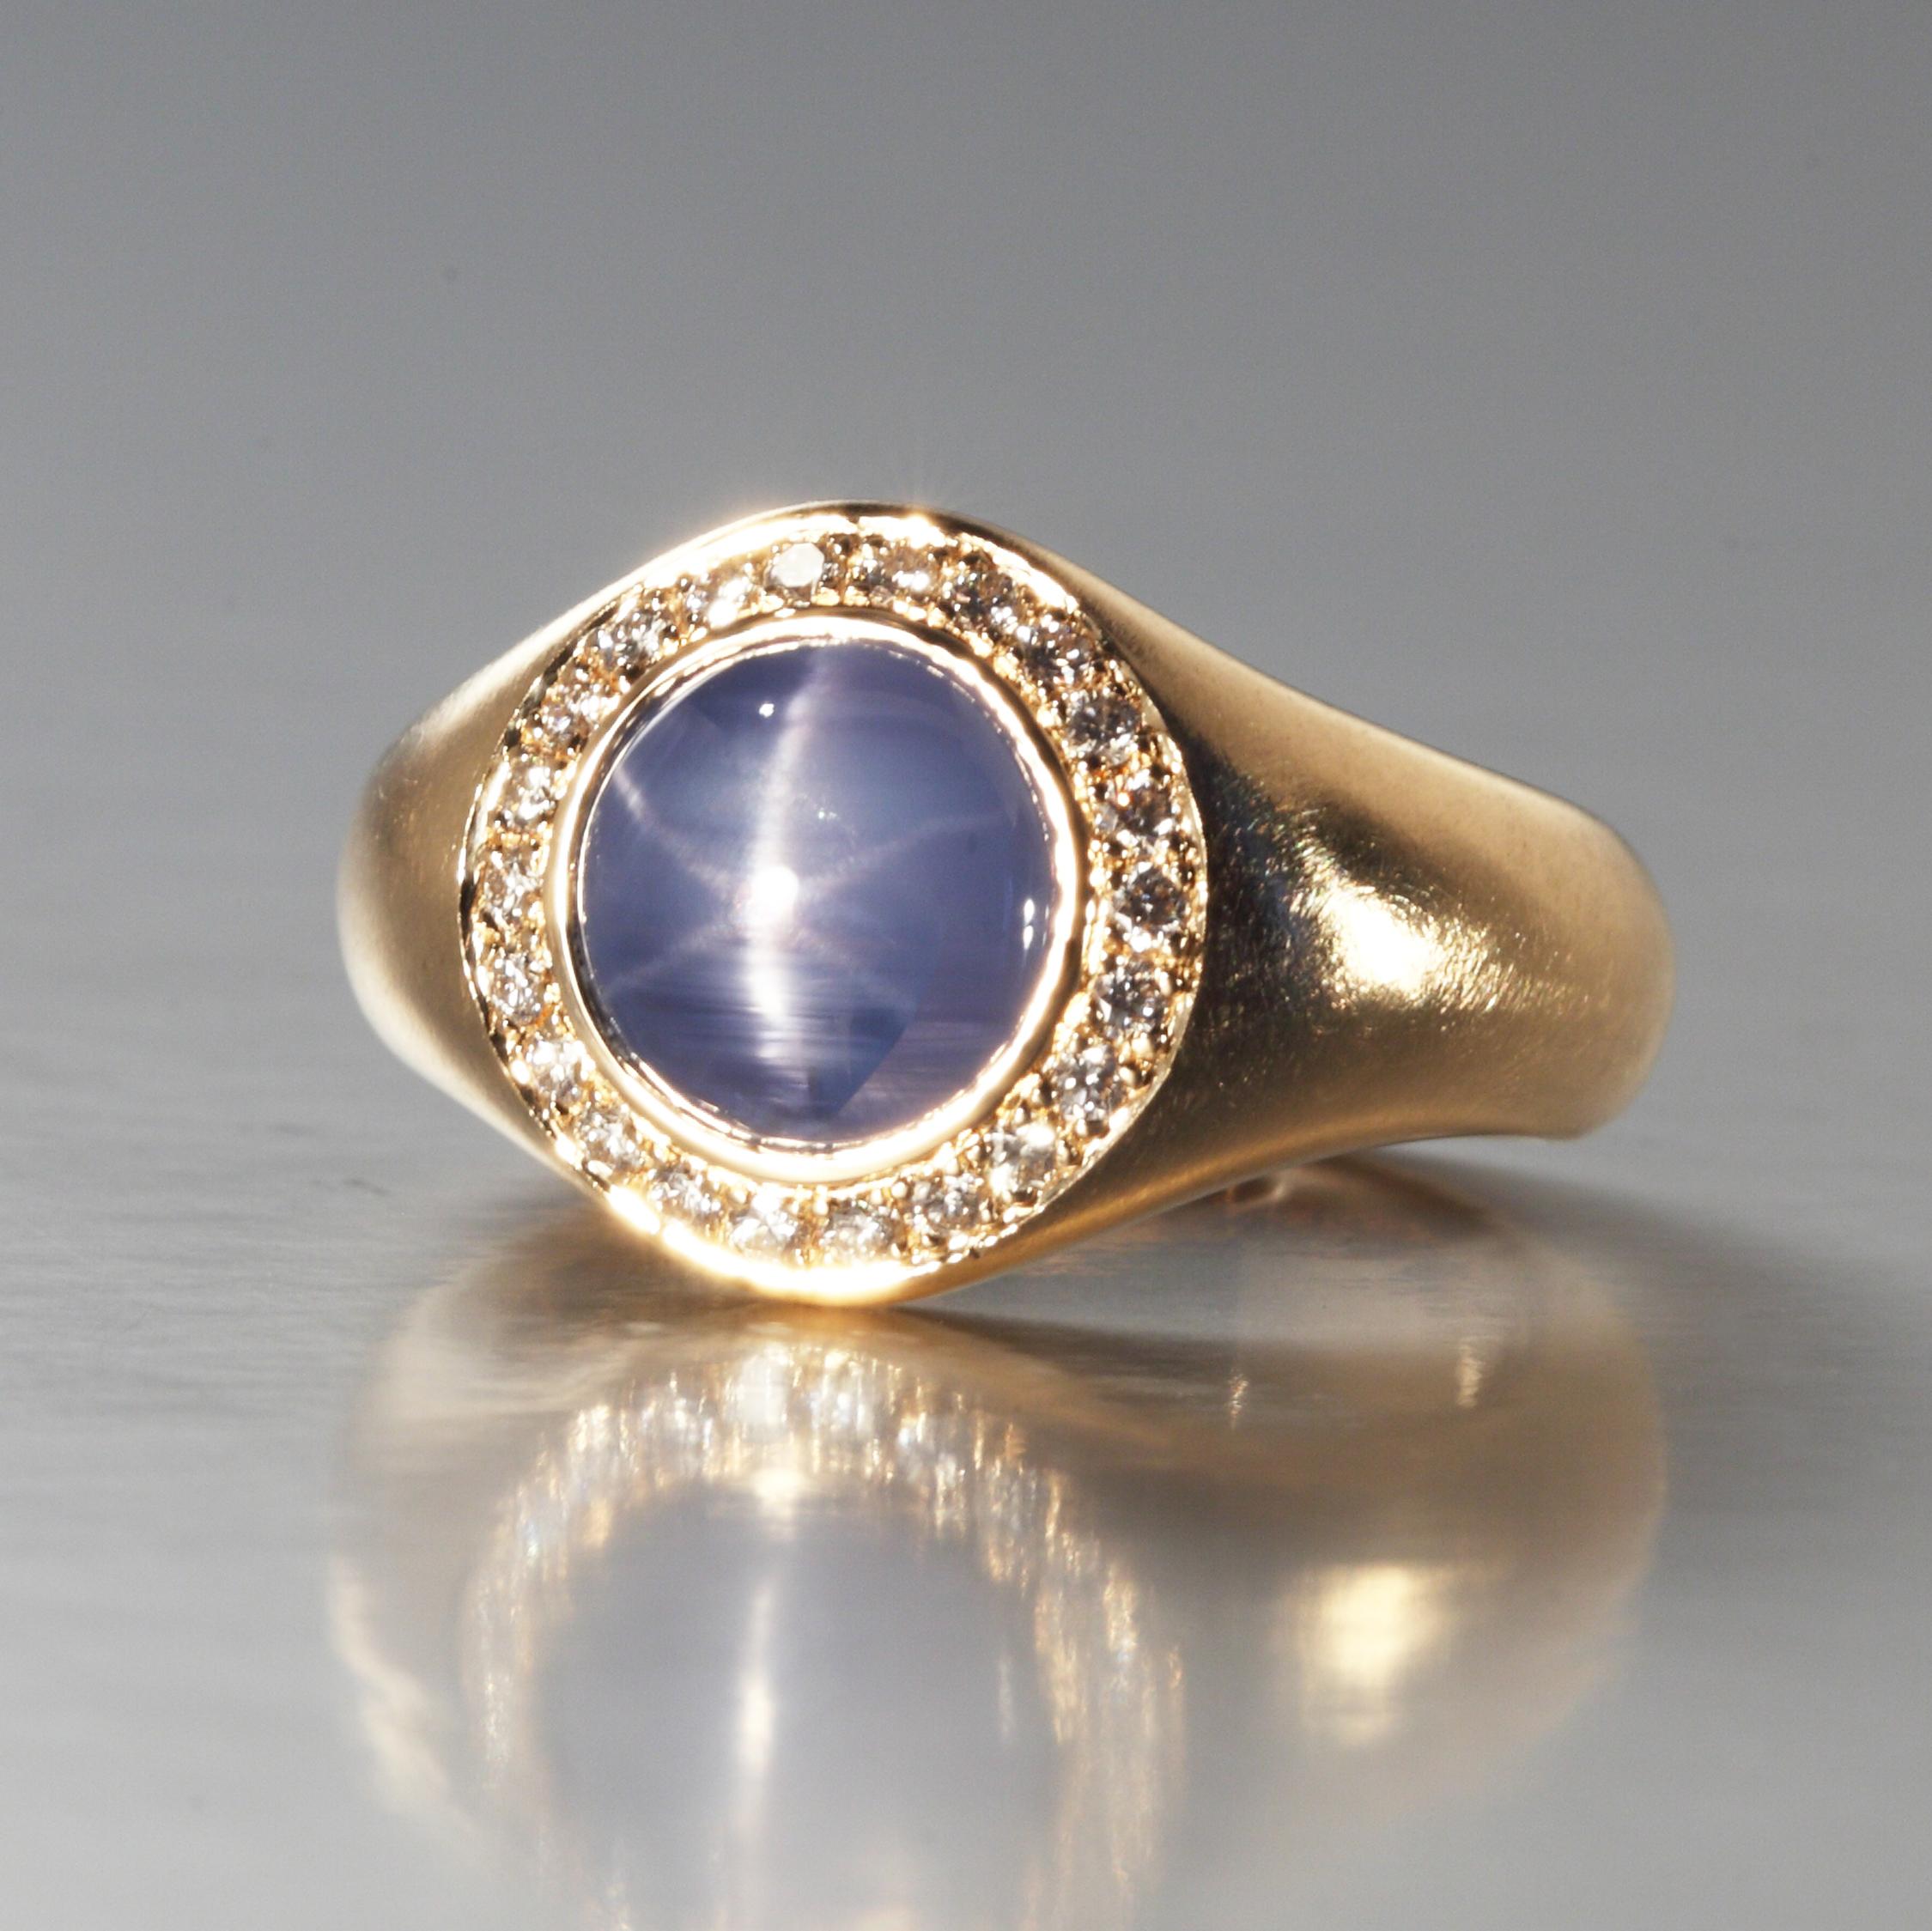 This star sapphire of 5.04 carats is set in a rose gold ring with 0.24 carats of diamonds F,G vvs. It is designed and hand made in Zurich, Switzerland by Robert Vogelsang and is a one of a kind piece signed RV.

It is set in 18K rose gold and weighs